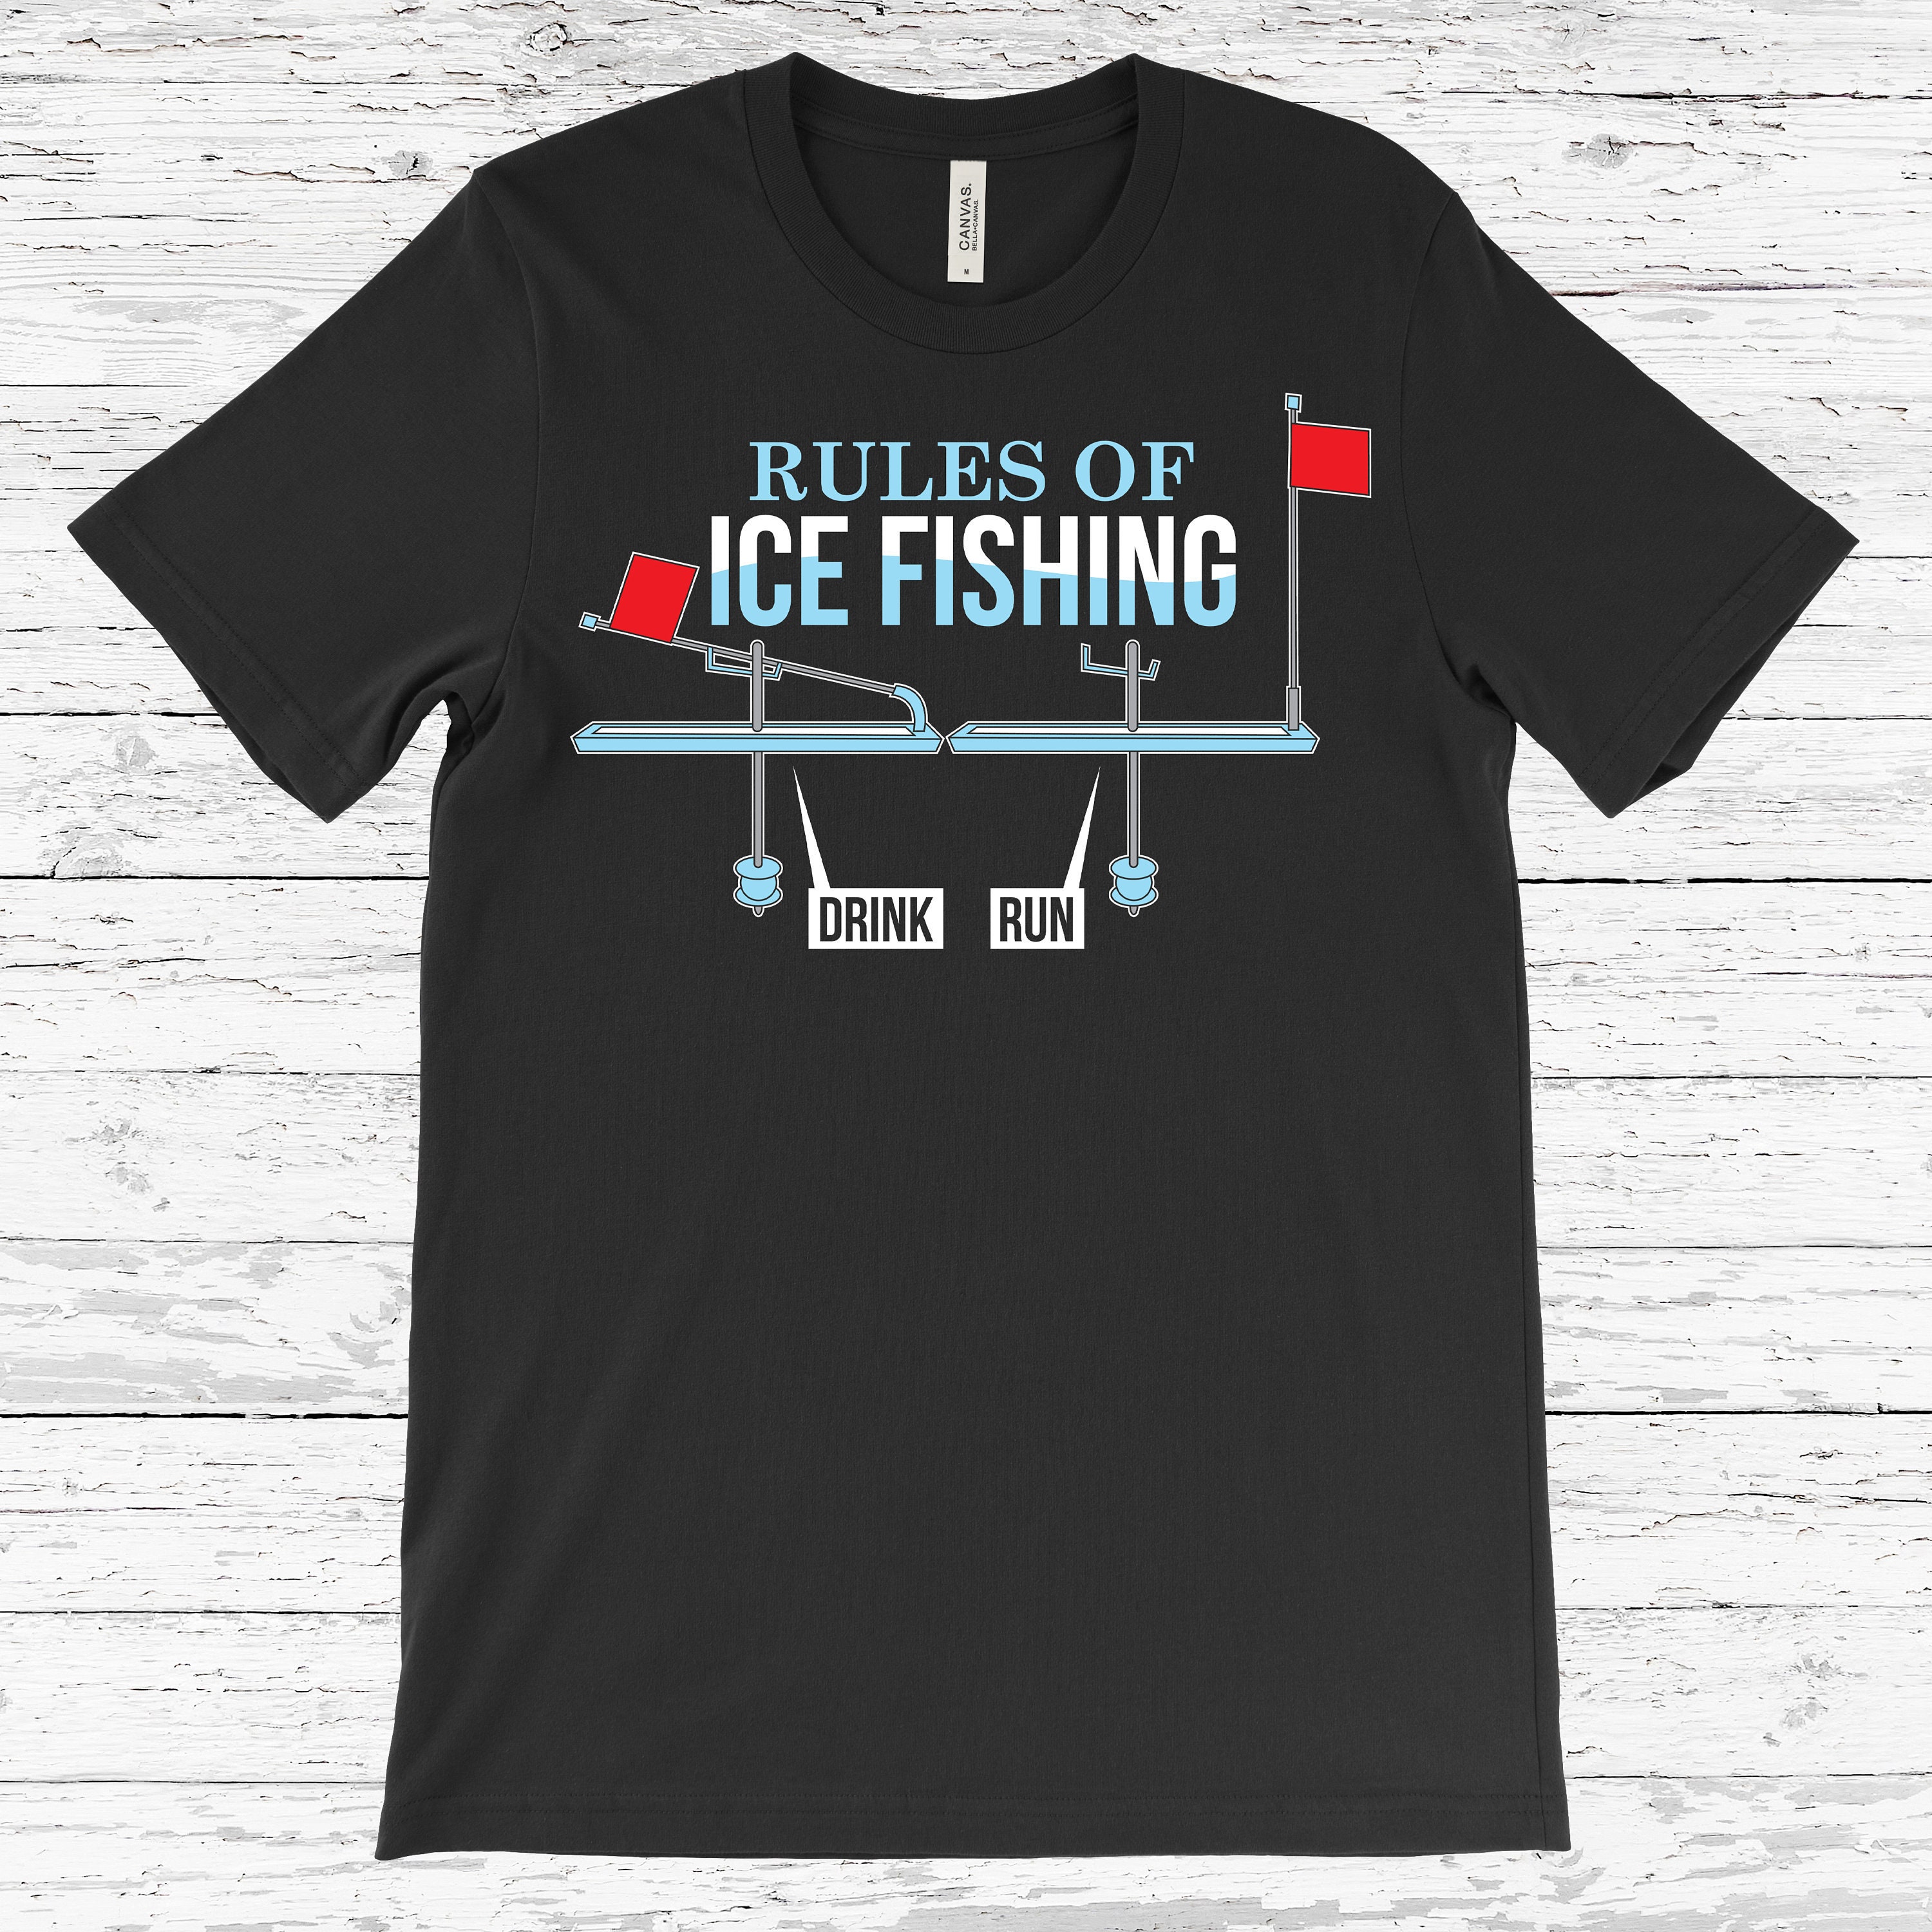 Rules of Ice Fishing T-shirt, Funny Winter Fishing Lovers Gift Tees,  Fisherman Present, Fish Frozen Lake Tshirt, Dad, Grandpa, Father's Day, 